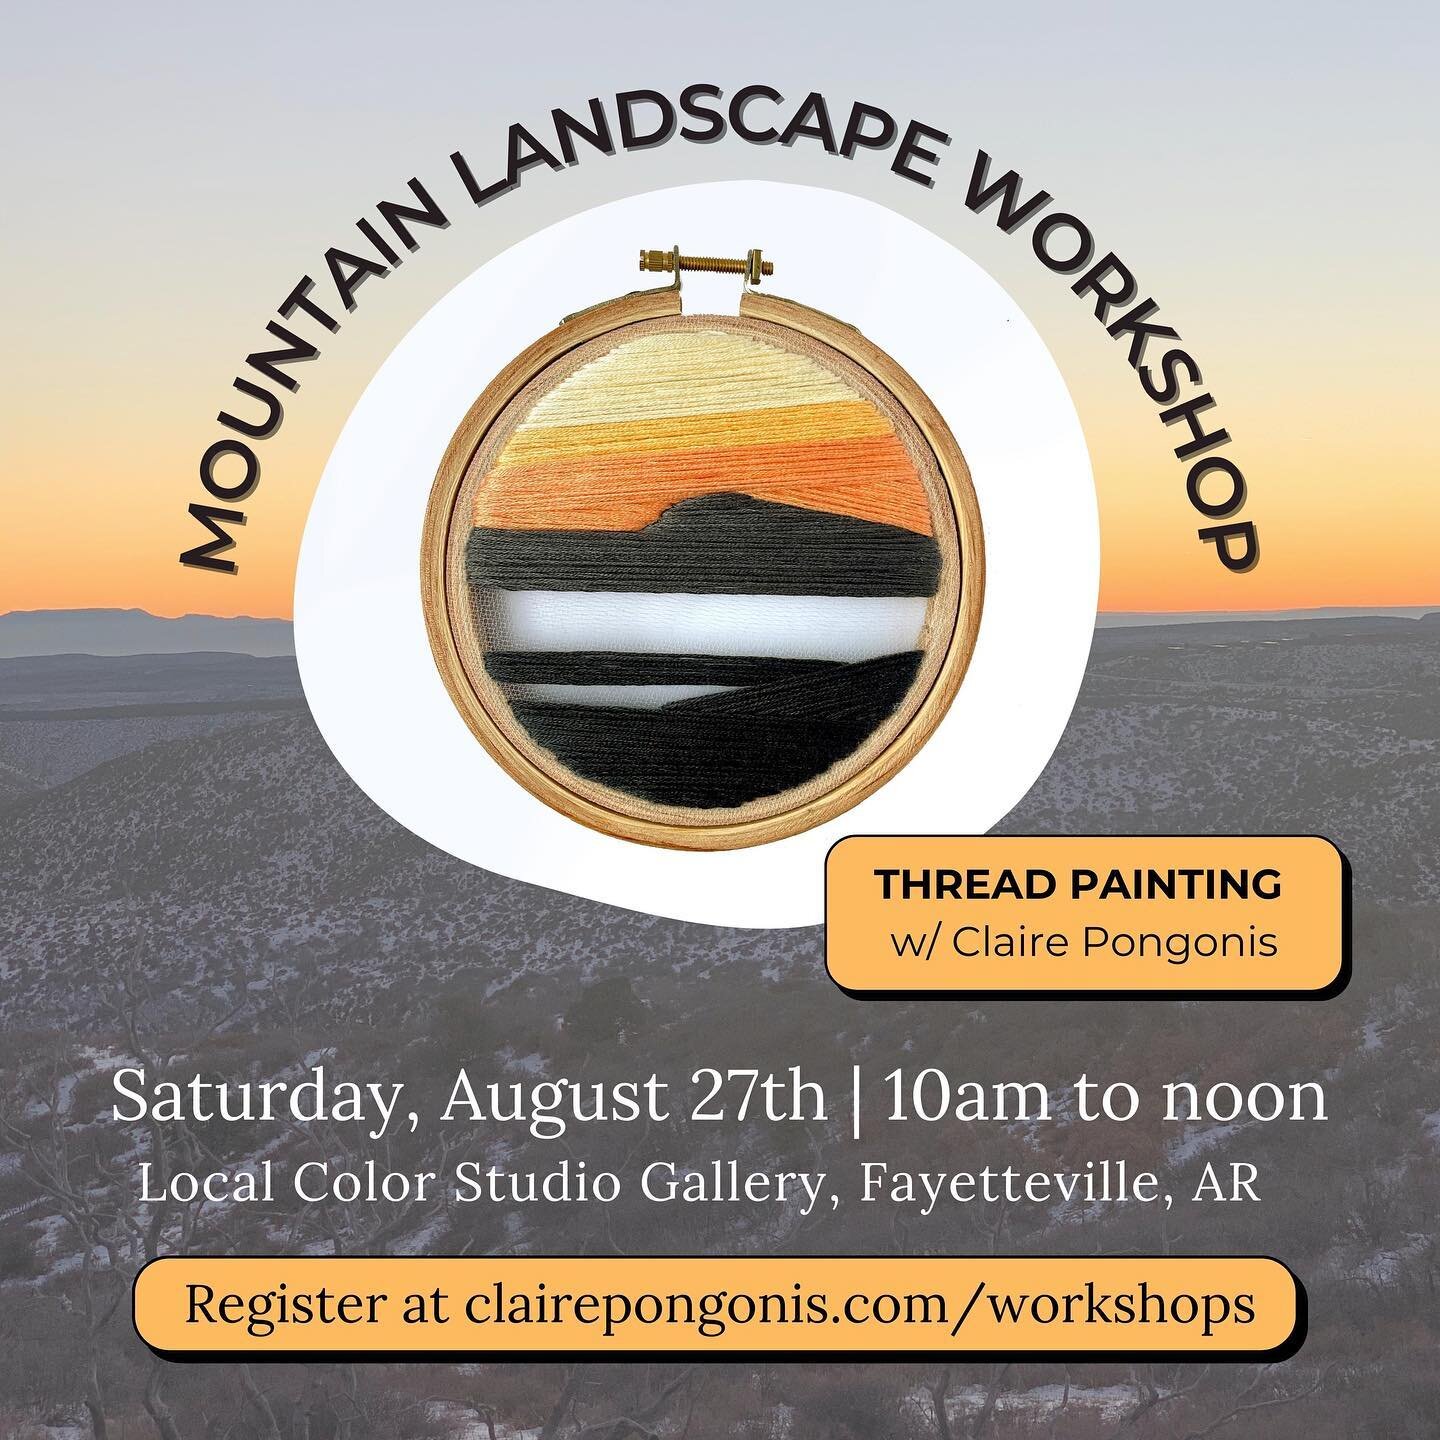 Come stitch with me!

Inspired by one of my favorite thread paintings, we&rsquo;ll create a 5.5&rdquo; mountain landscape thread painting.

This 2-hour workshop will cover many of the basics of capturing an abstract landscape. You will leave with a l